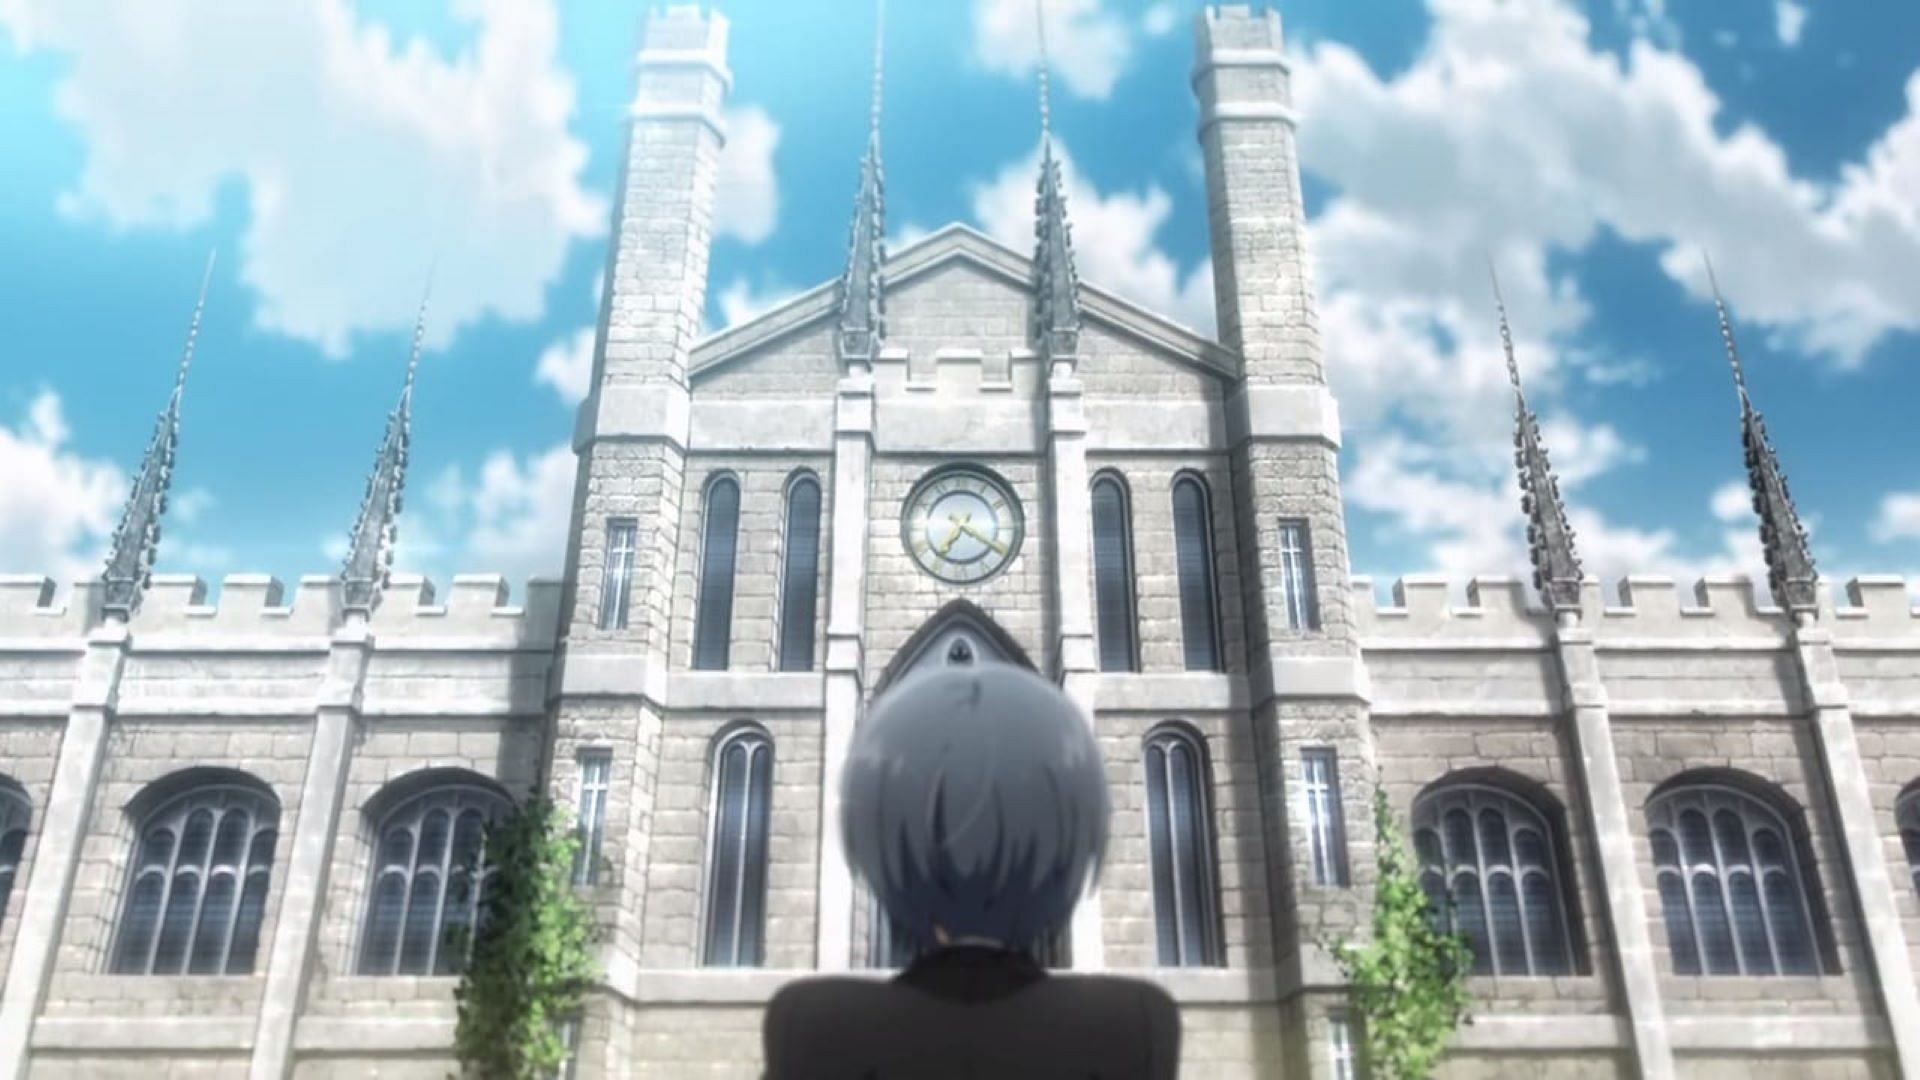 Weston College, as seen in the anime (Image via CloverWorks)